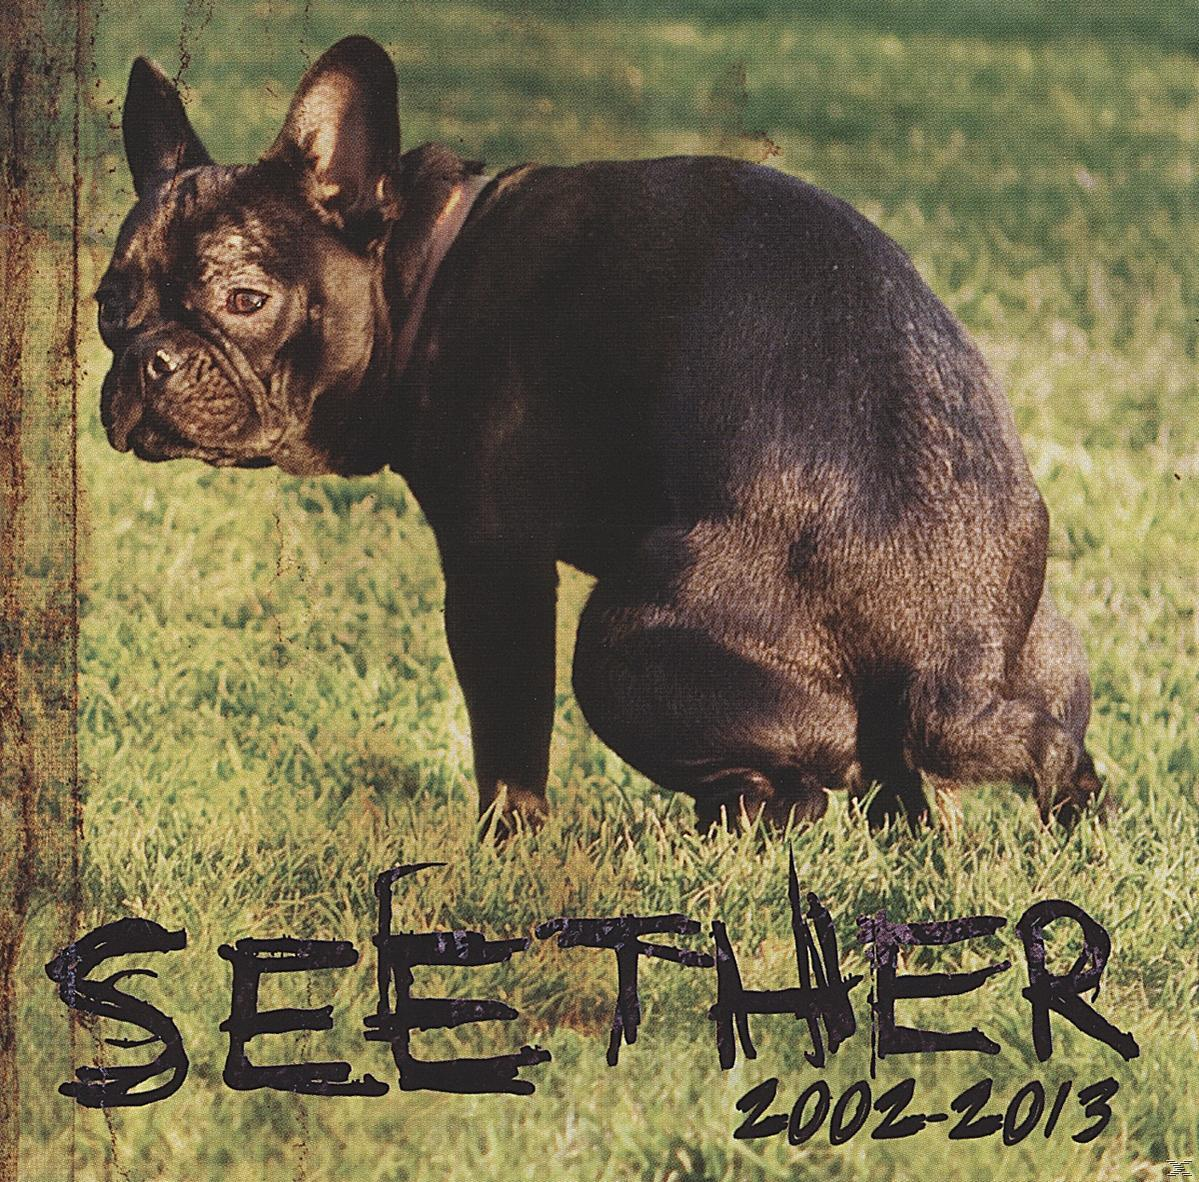 Seether - Seether (CD) - 2002-2013